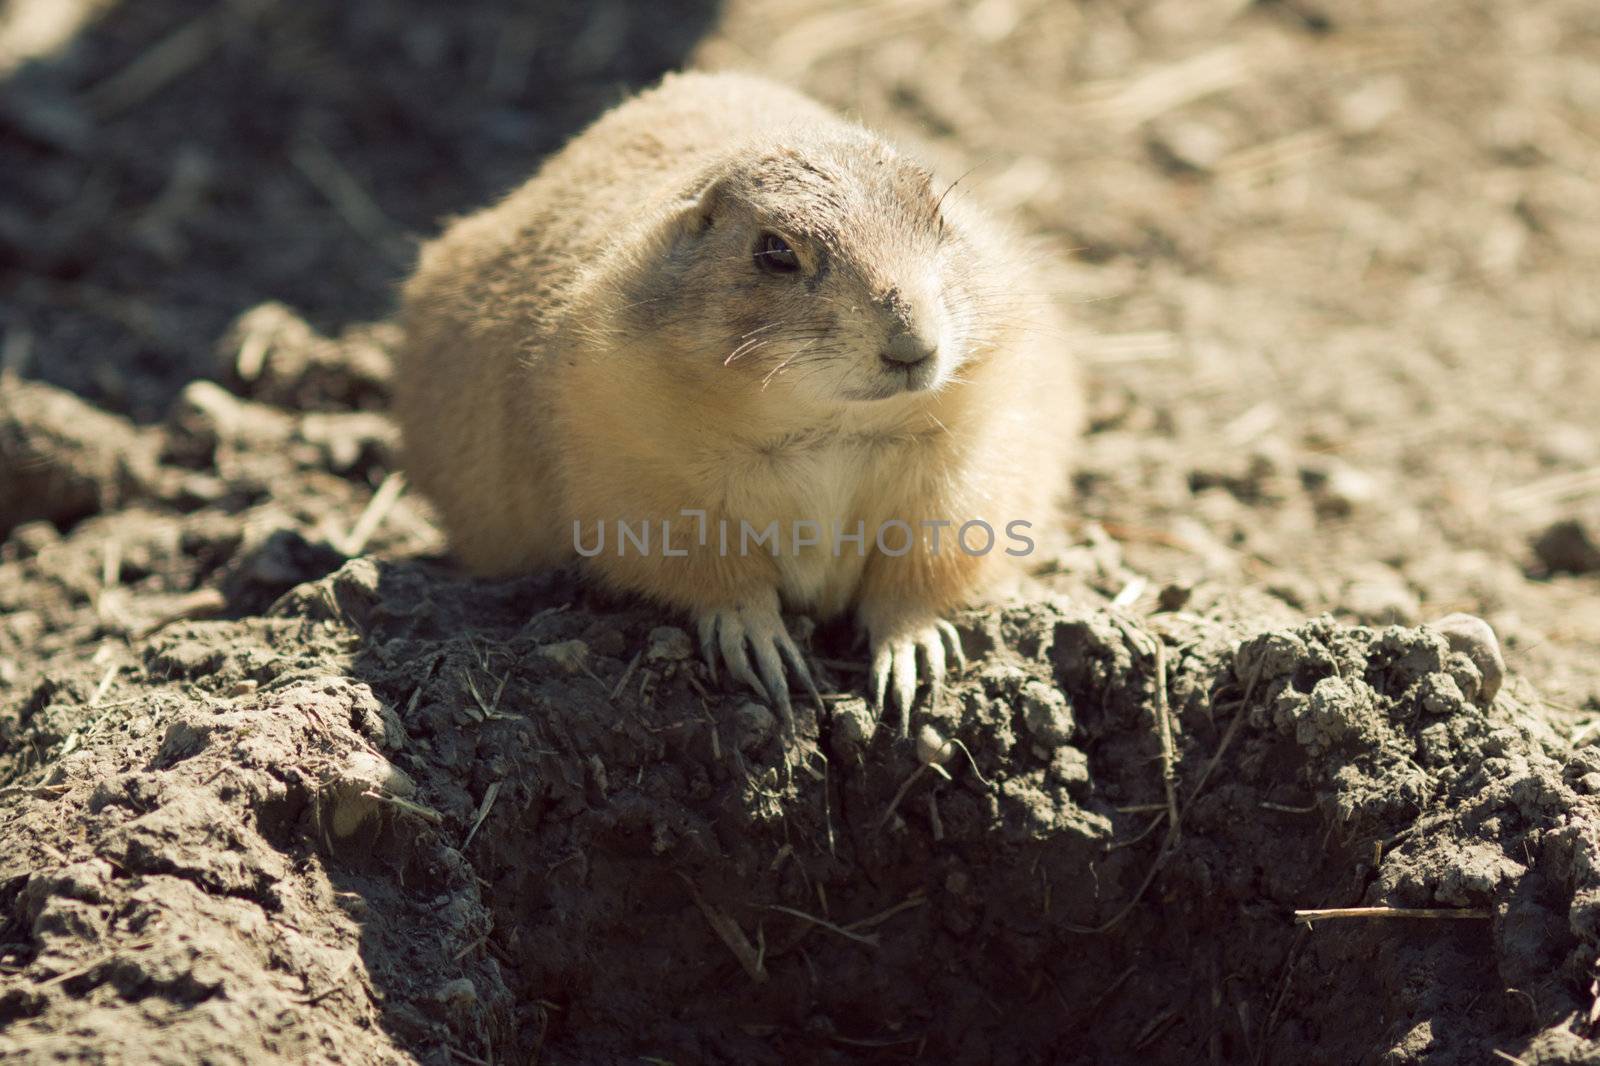 Gopher(Spermophilus dauricus) in the wild nature near the mink